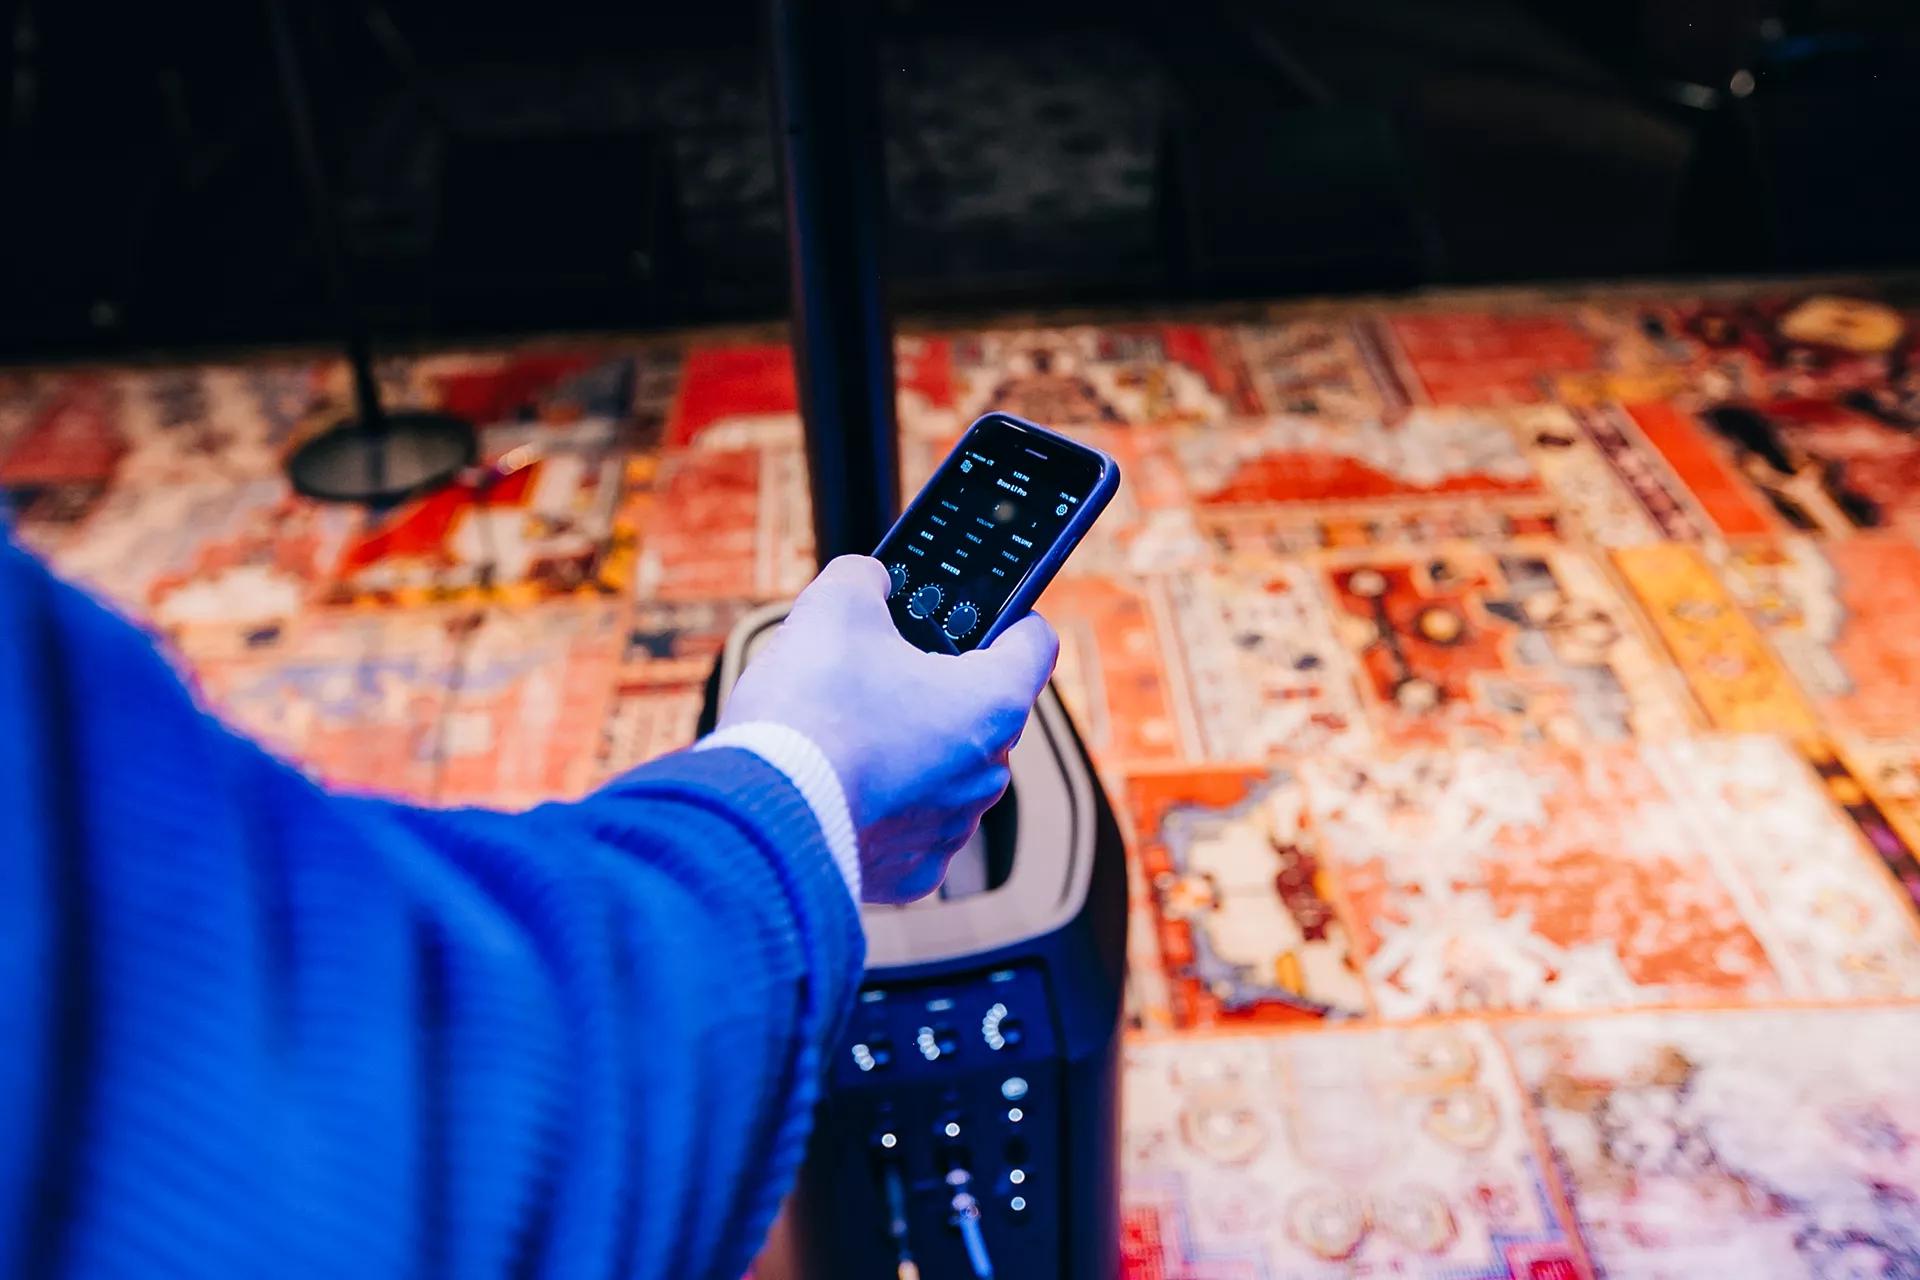 A hand using a mobile device connected to a Bose L1 Pro Line Array system